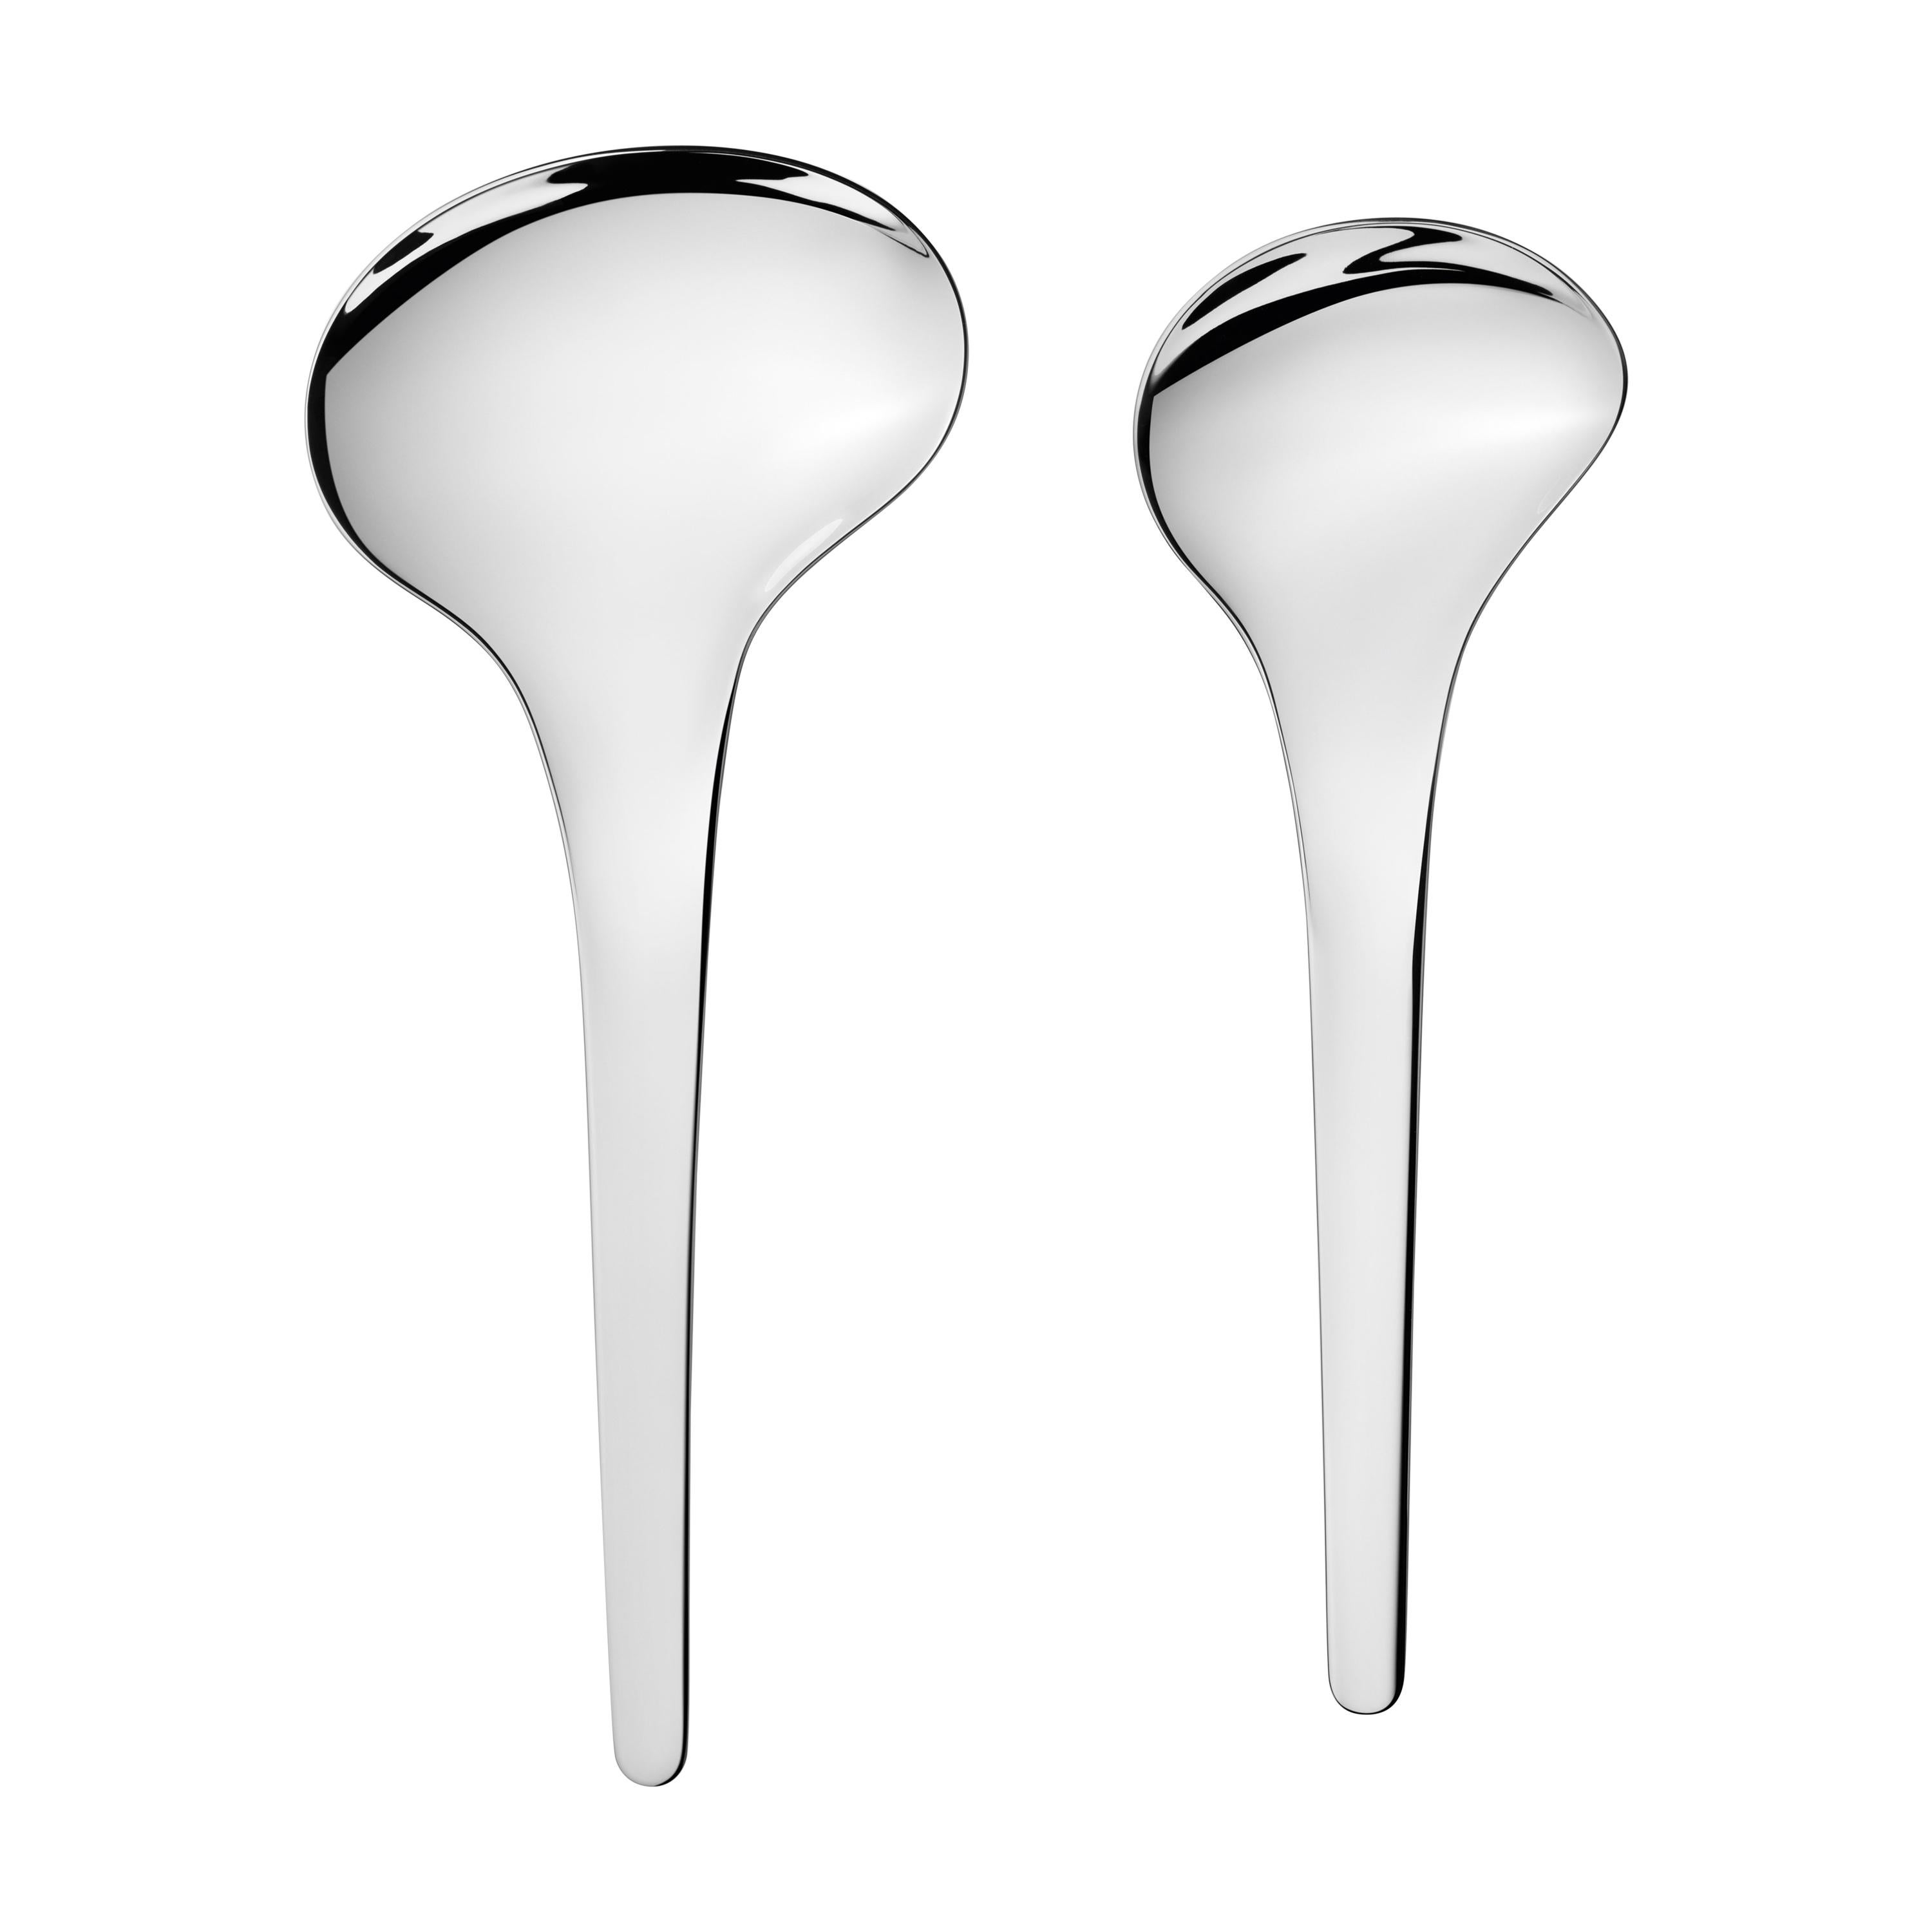 Bloom Serving Spoon 2-Piece Set in Stainless Steel Finish by Helle Damkjaer